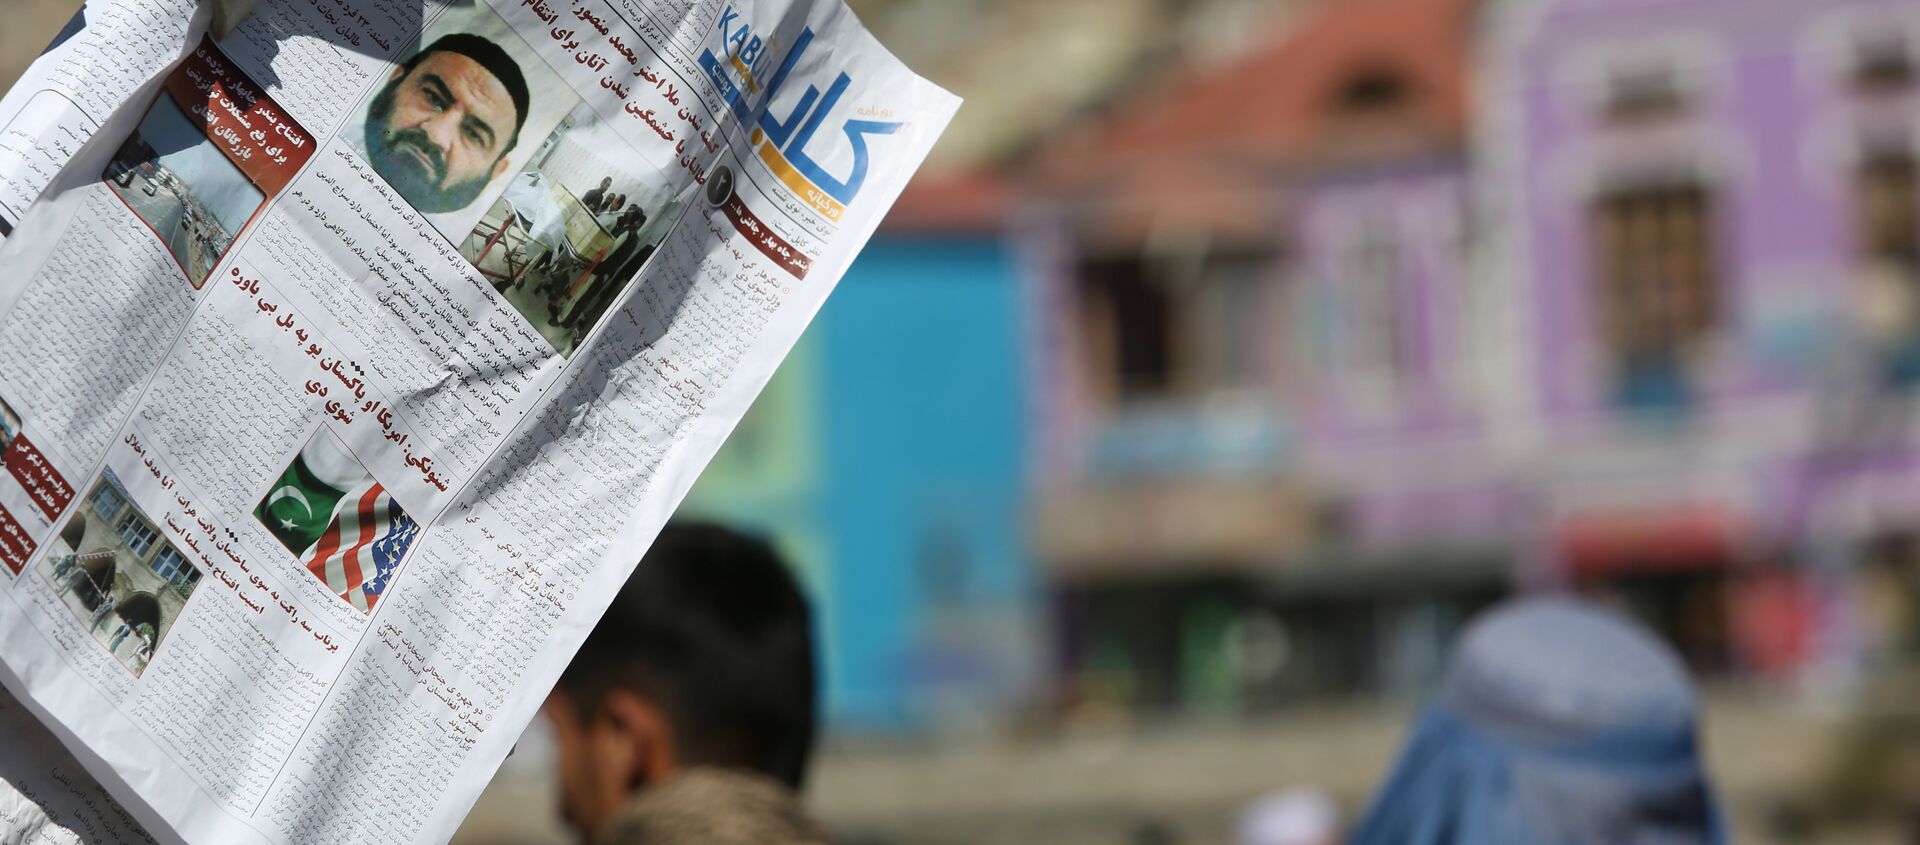 Newspapers hang for sale at a stand carrying headlines about the former leader of the Afghan Taliban, Mullah Akhtar Mansoor, who was killed in a U.S. drone strike last week, in Kabul, Afghanistan, Wednesday, May 25, 2016 - اسپوتنیک افغانستان  , 1920, 10.10.2018